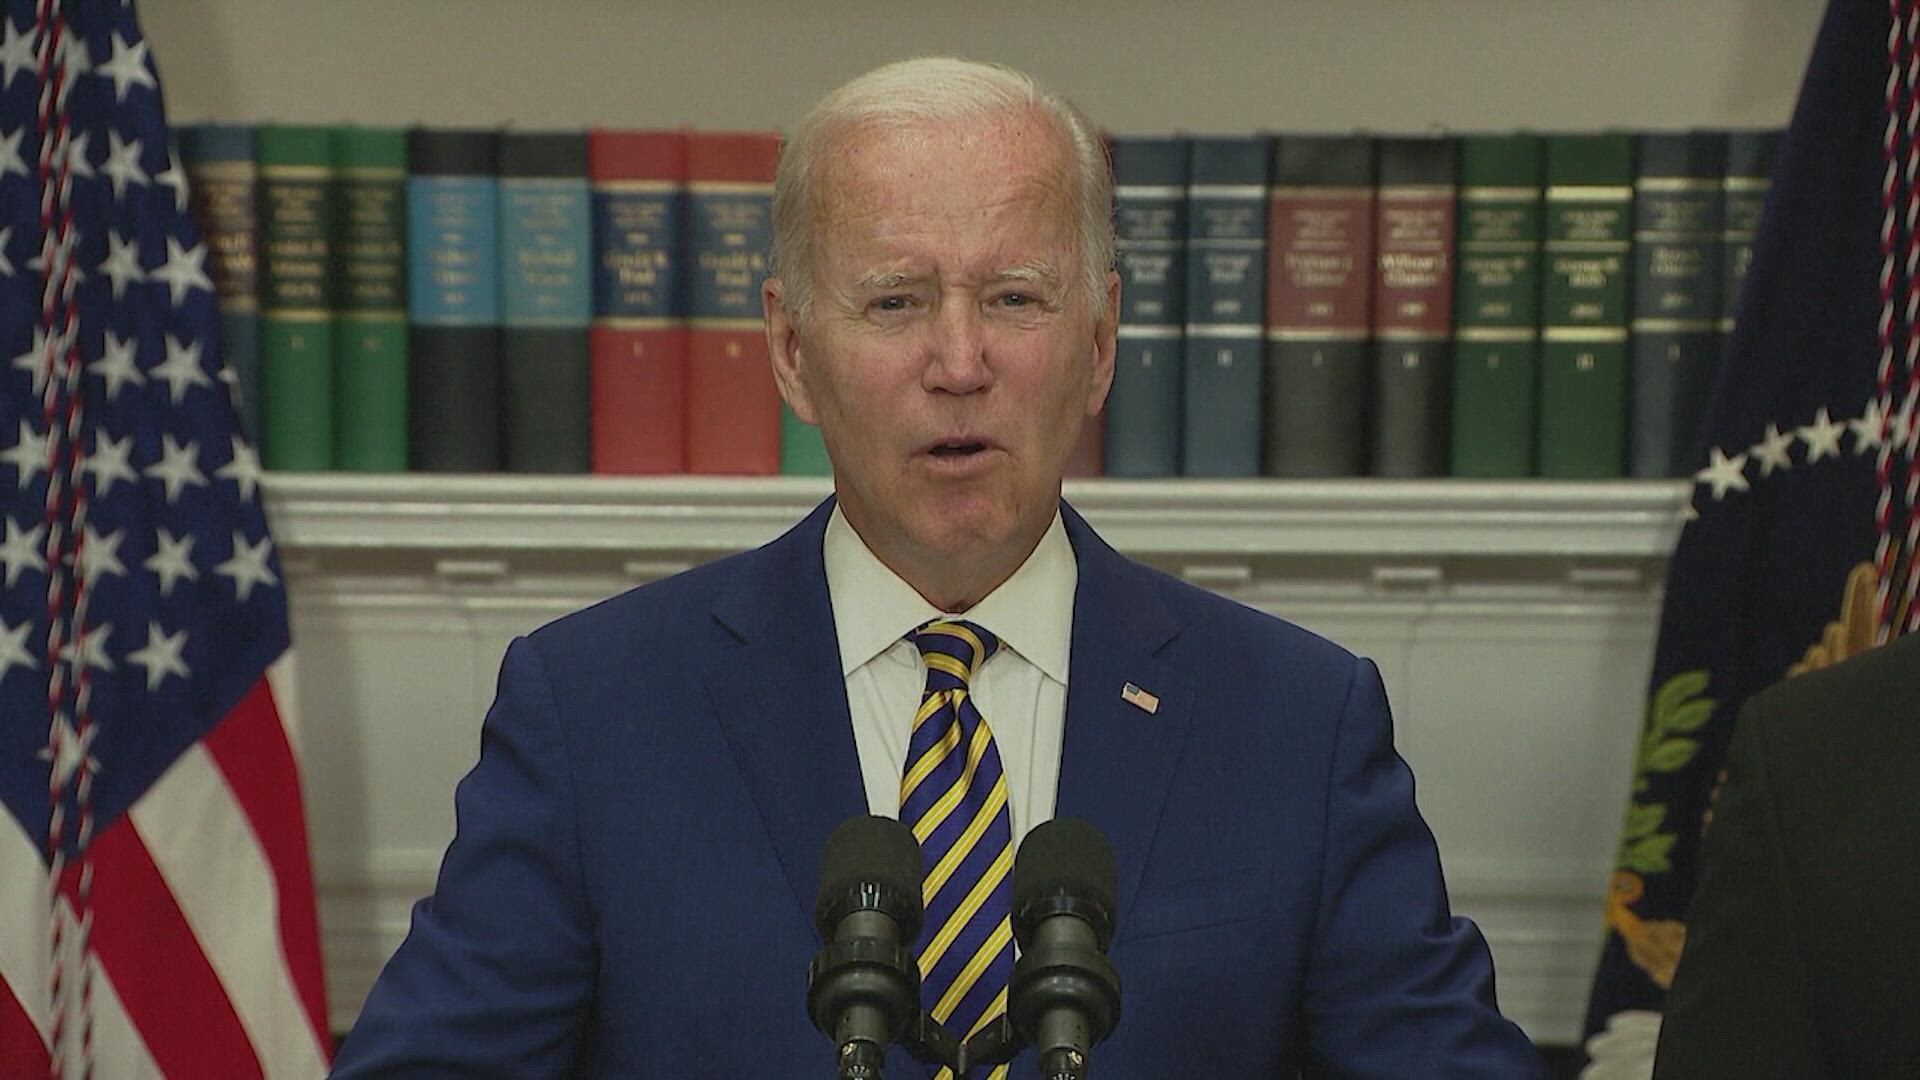 President Joe Biden’s administration will forgive between $10,000 and $20,000 in federal student loan debt.